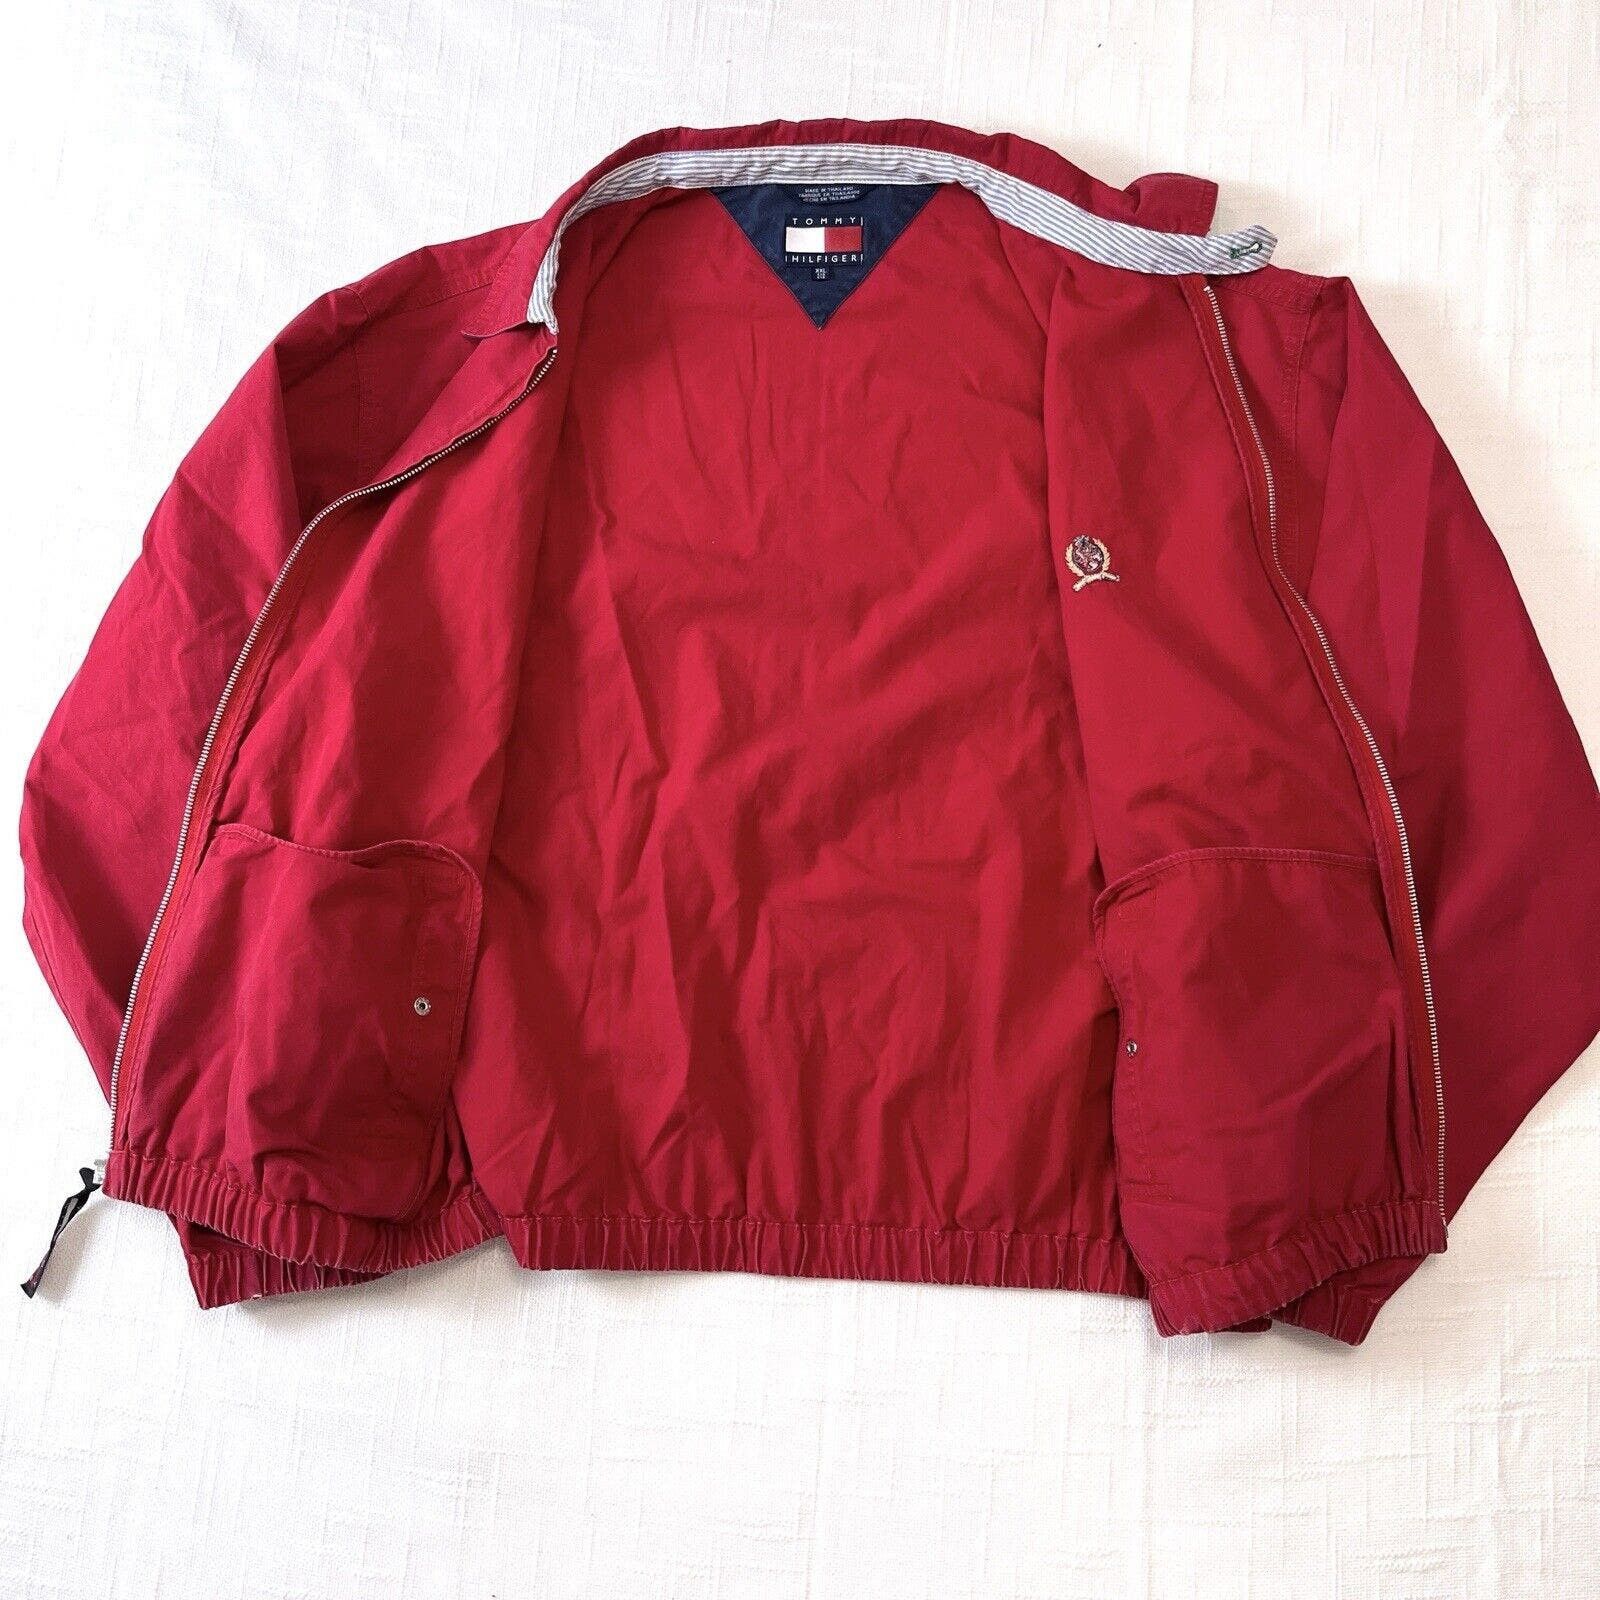 Vintage 90s Tommy Bomber Jacket Boxy Vtg Faded Zip Unlined Collared Size US XXL / EU 58 / 5 - 2 Preview